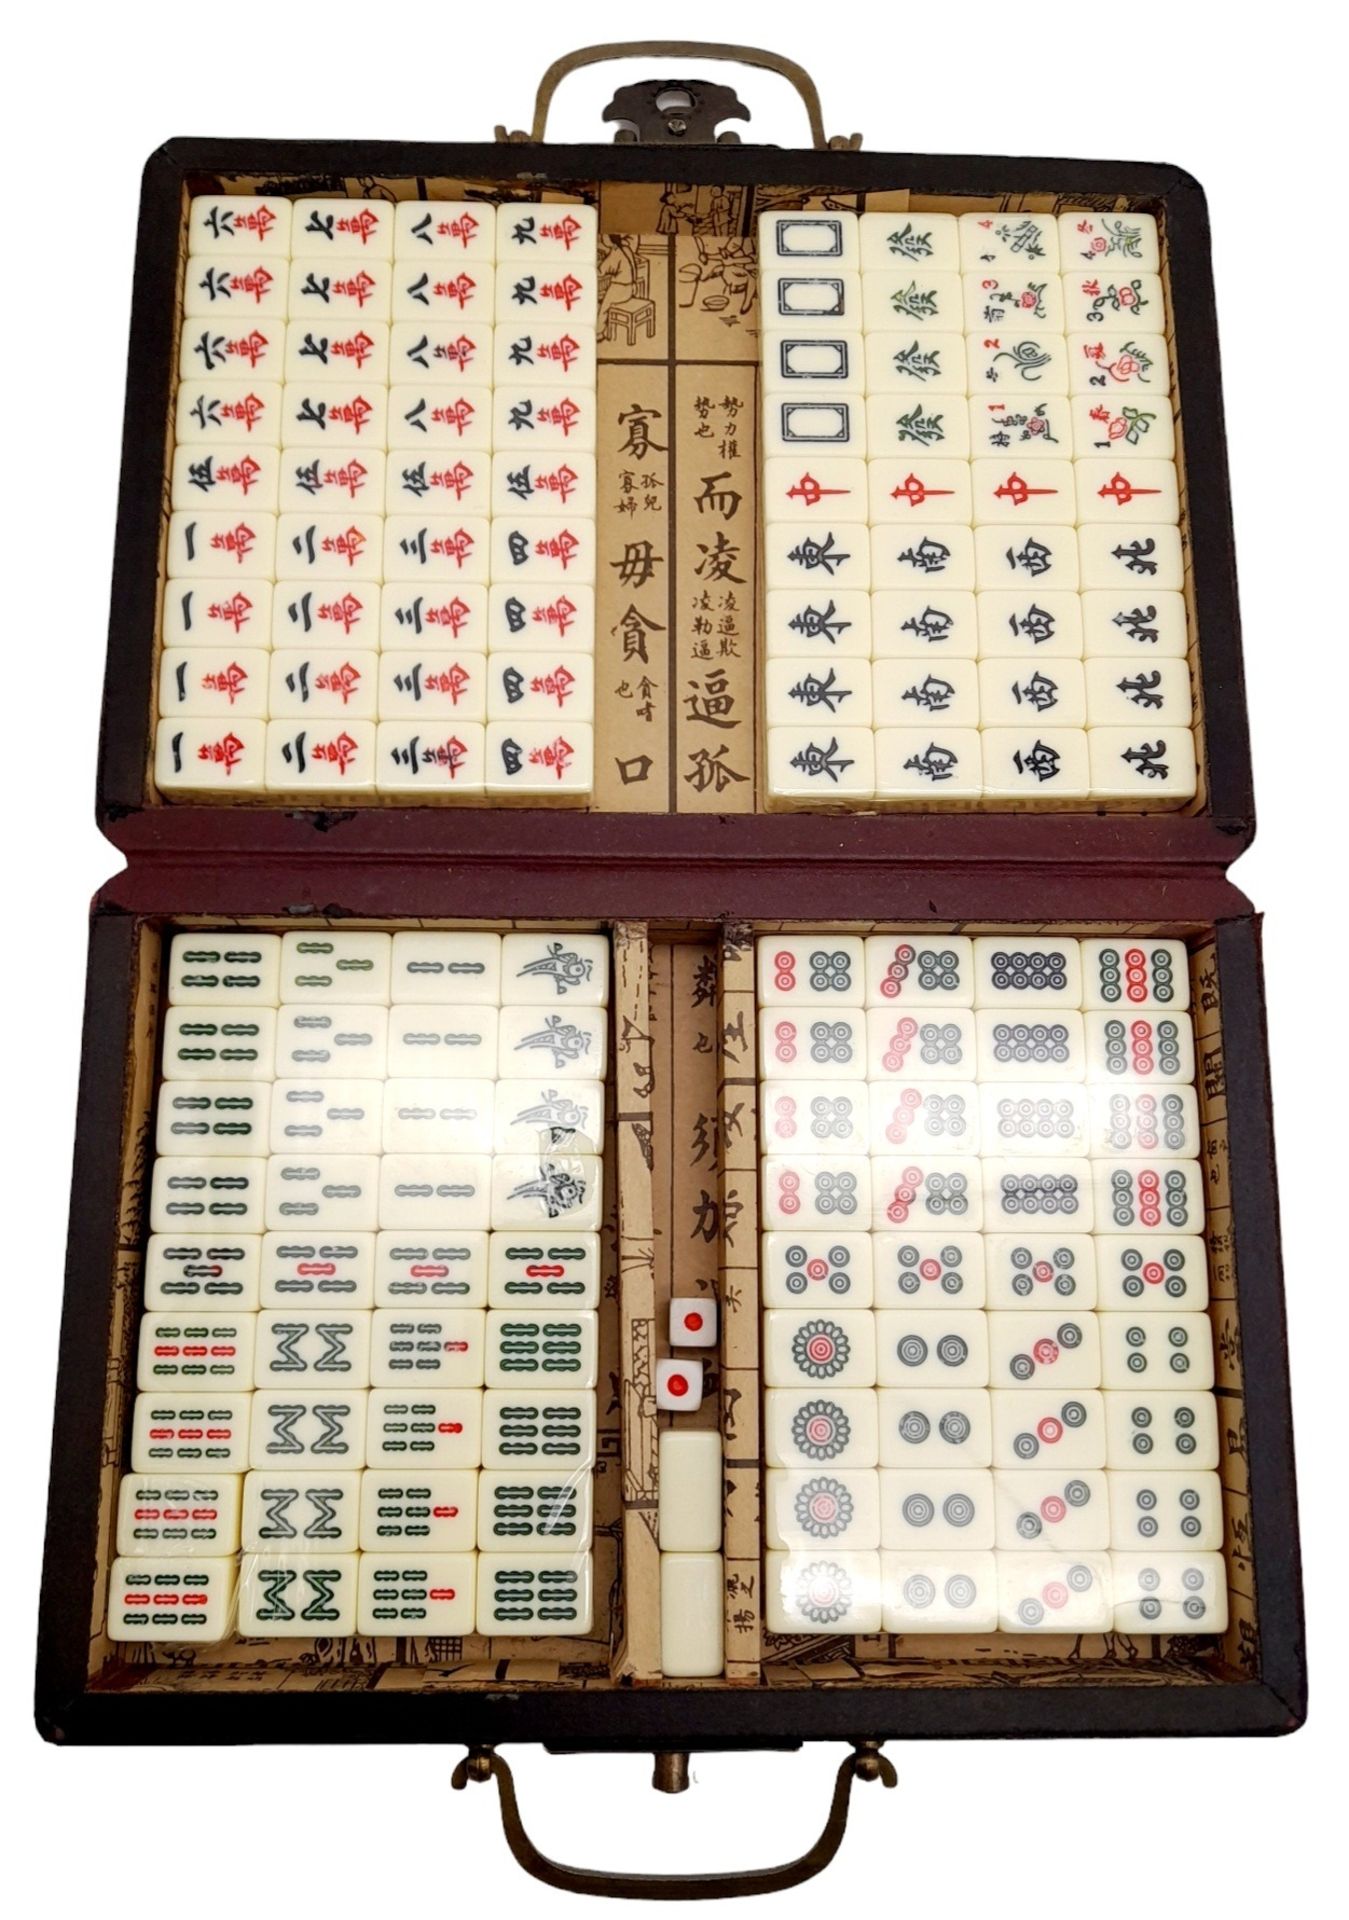 A Mah Jongg Chinese Dice Game in a Small Decorative Travelling Case. In excellent condition. - Bild 6 aus 7